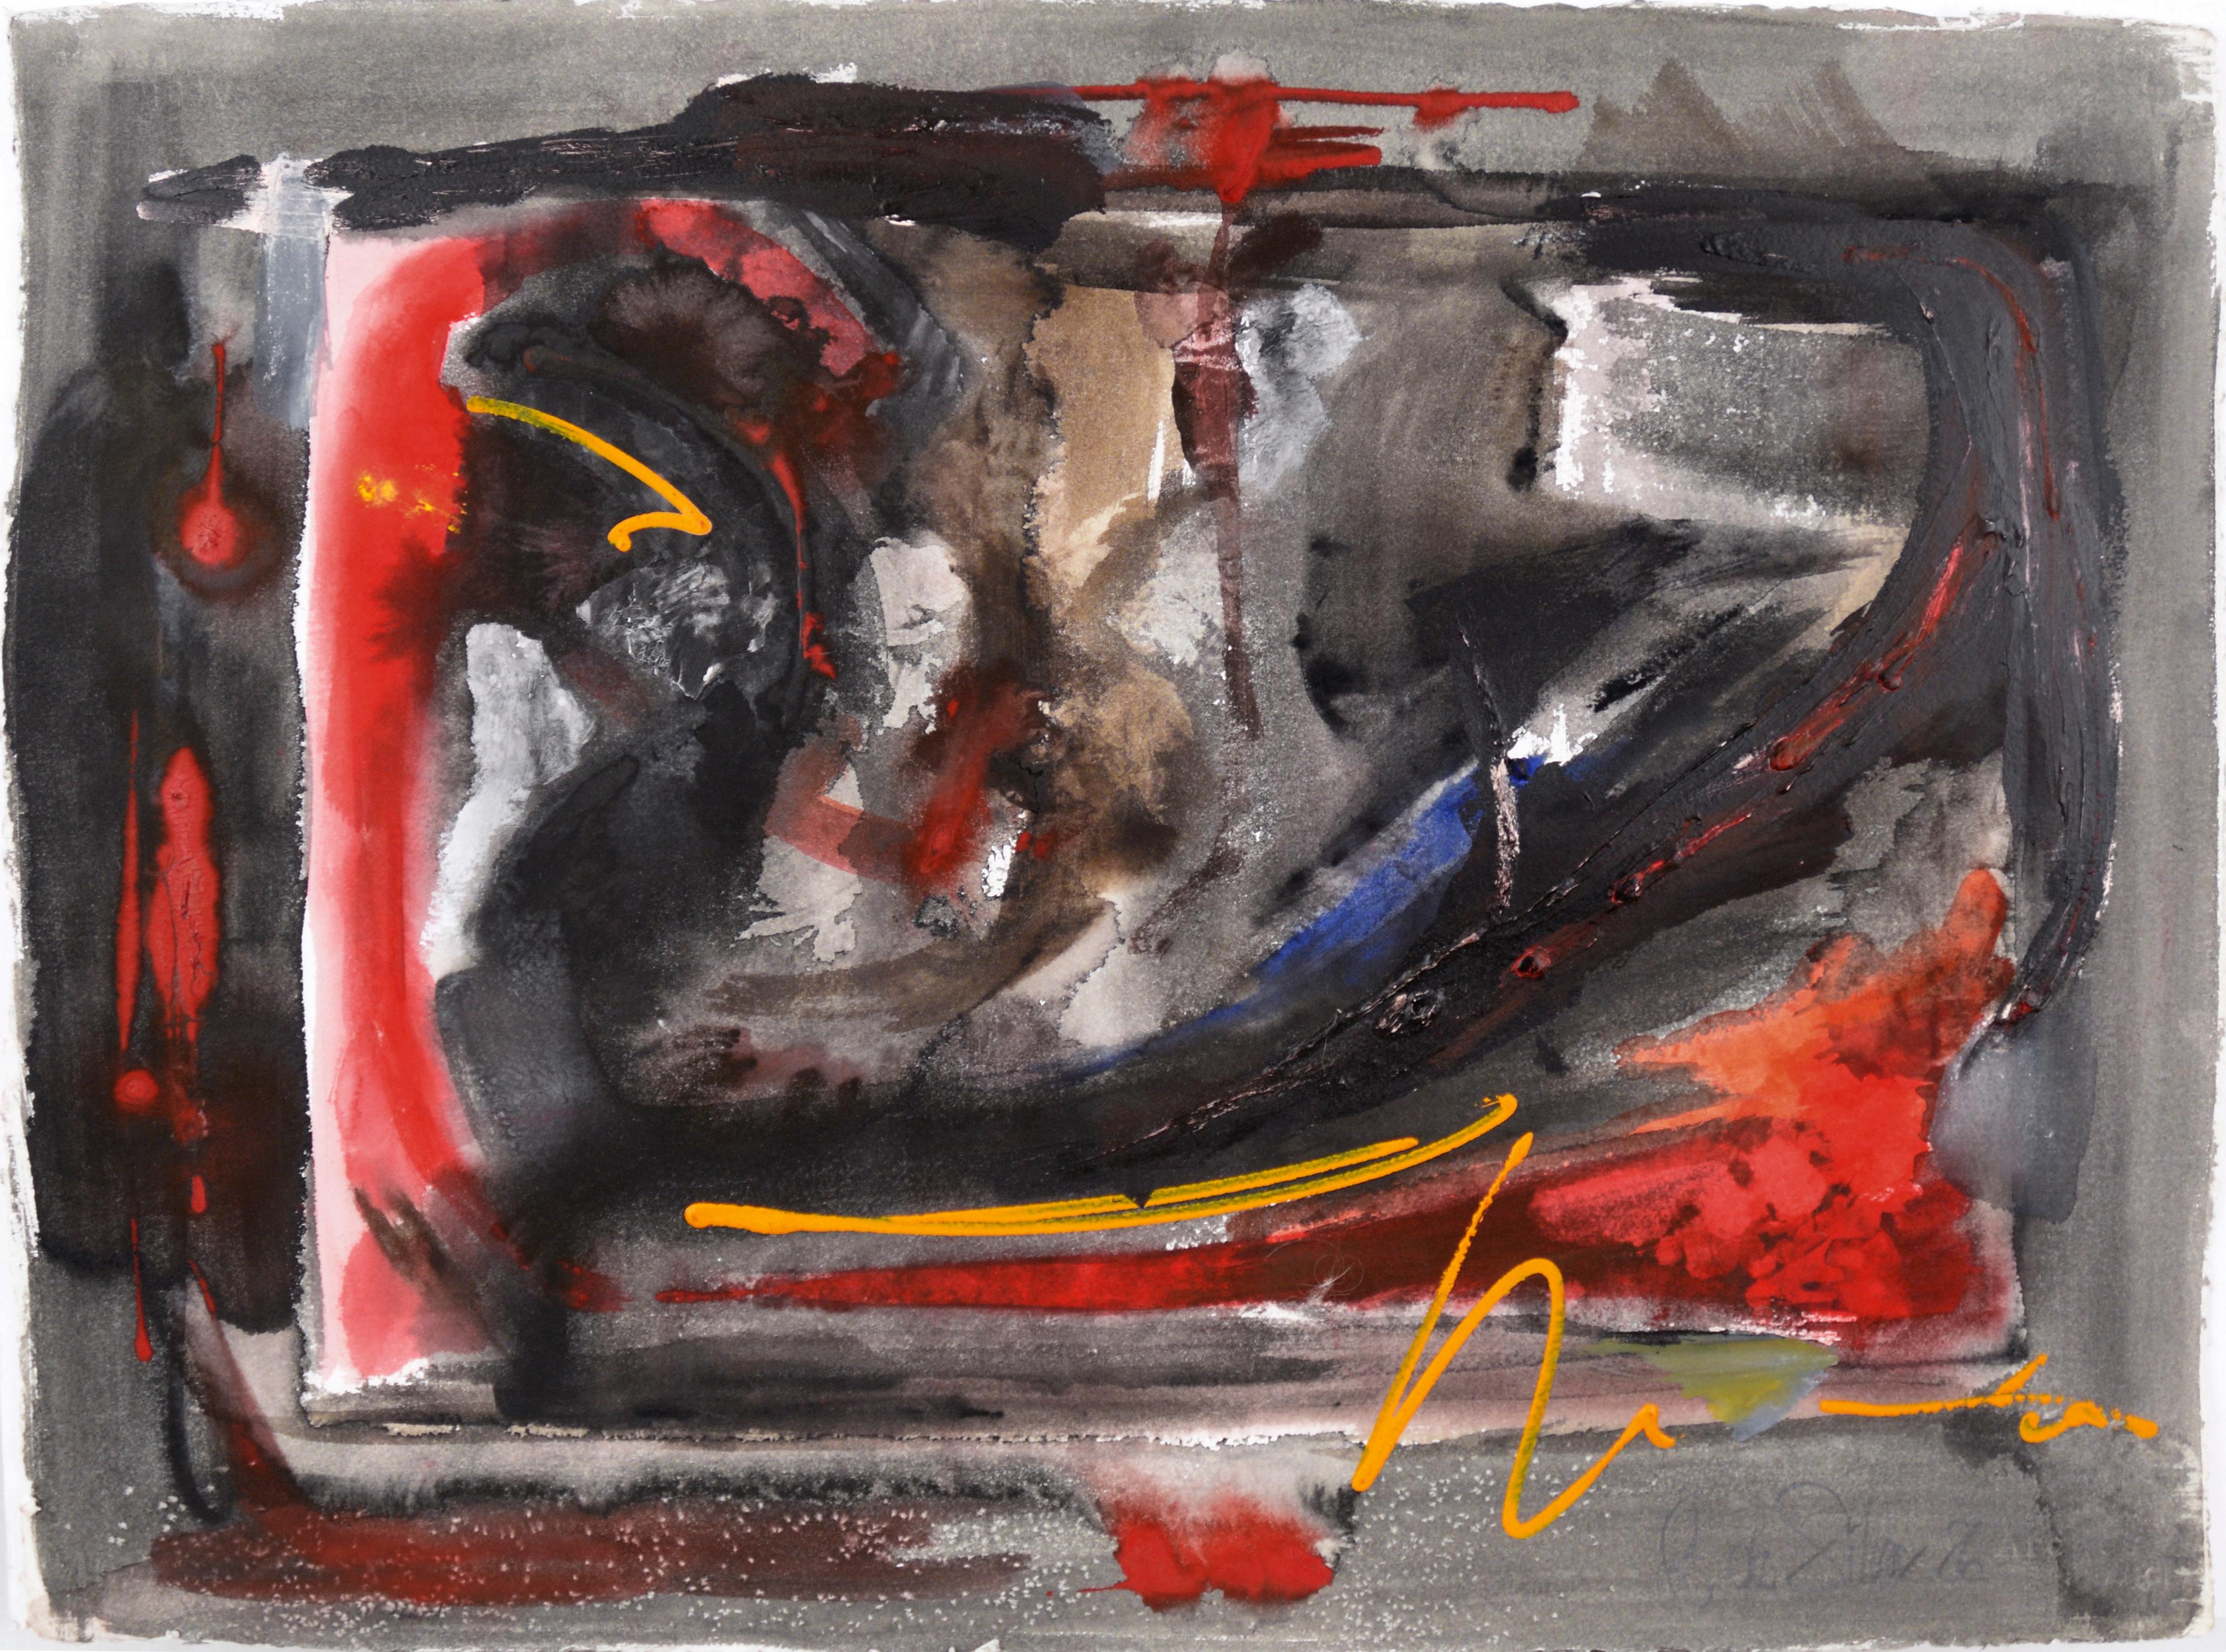 Primary Colors Abstract Expressionist - Mixed Media on Paper